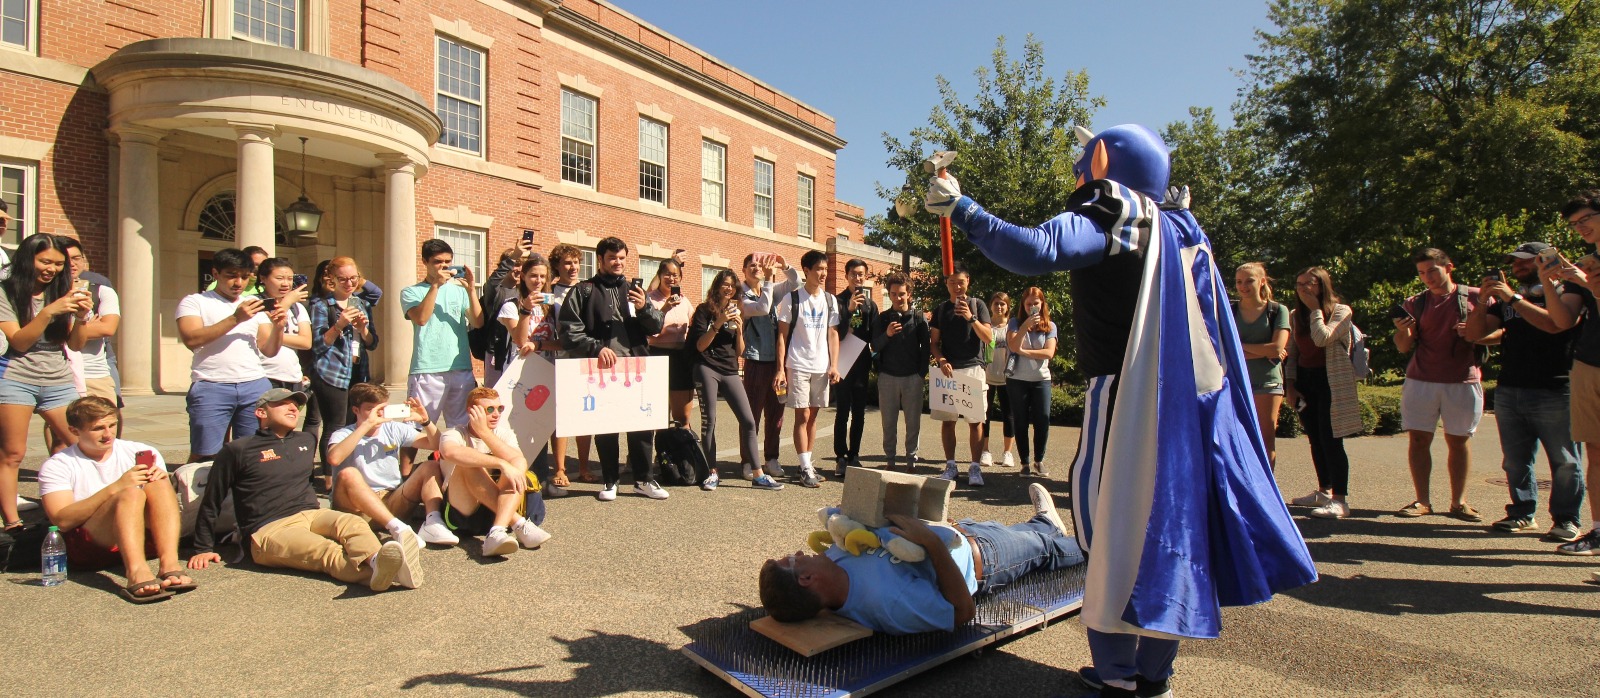 Professor David Schaad demonstrates force per inch with help from Duke mascot